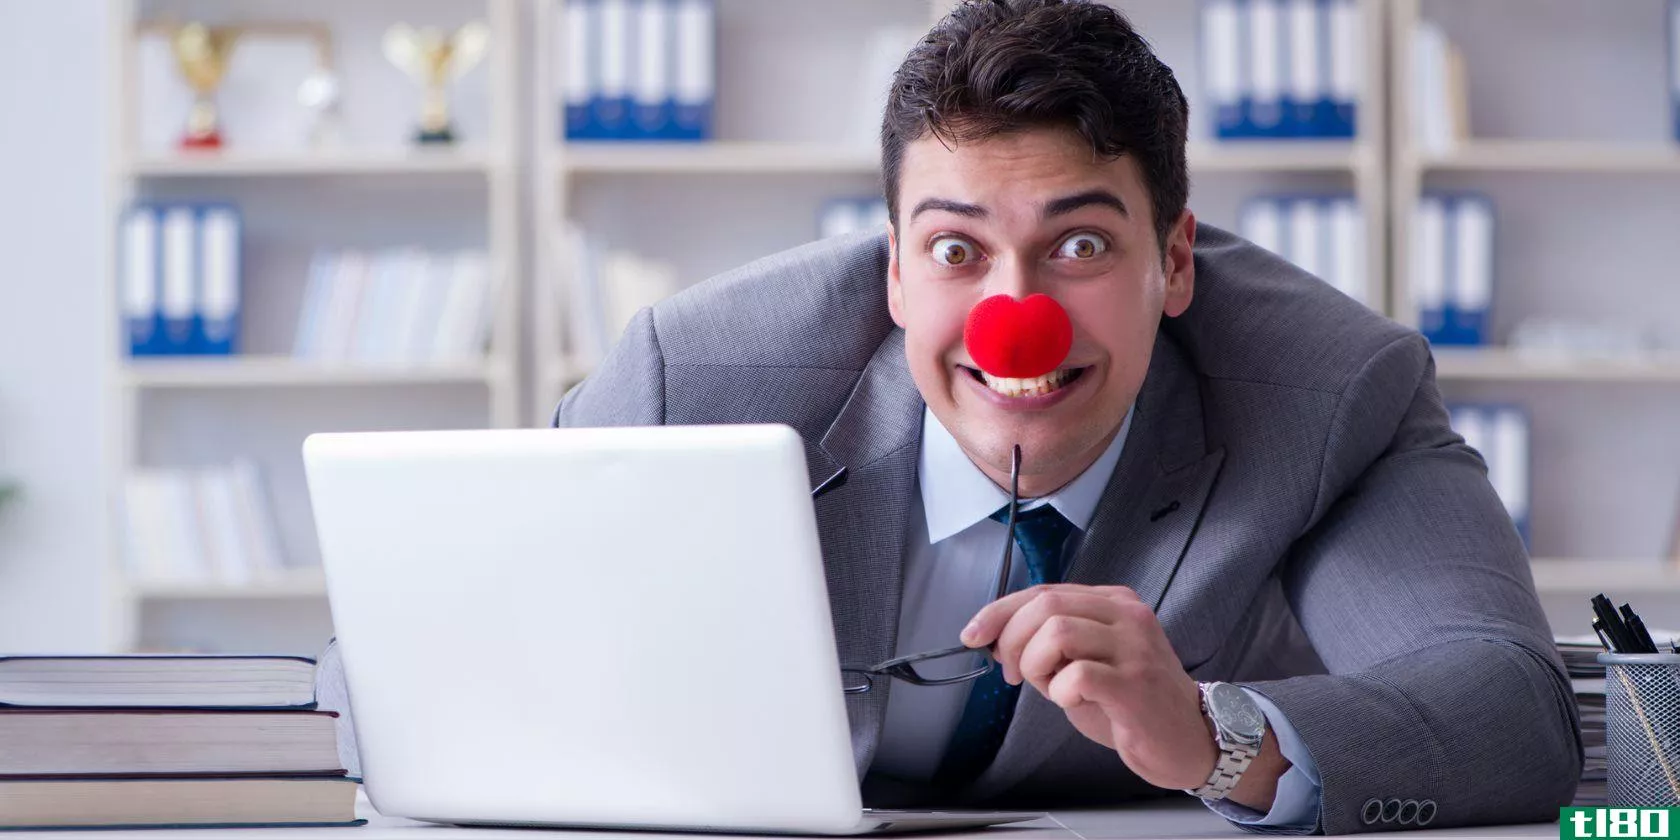 clown-busines**an-working-in-the-office